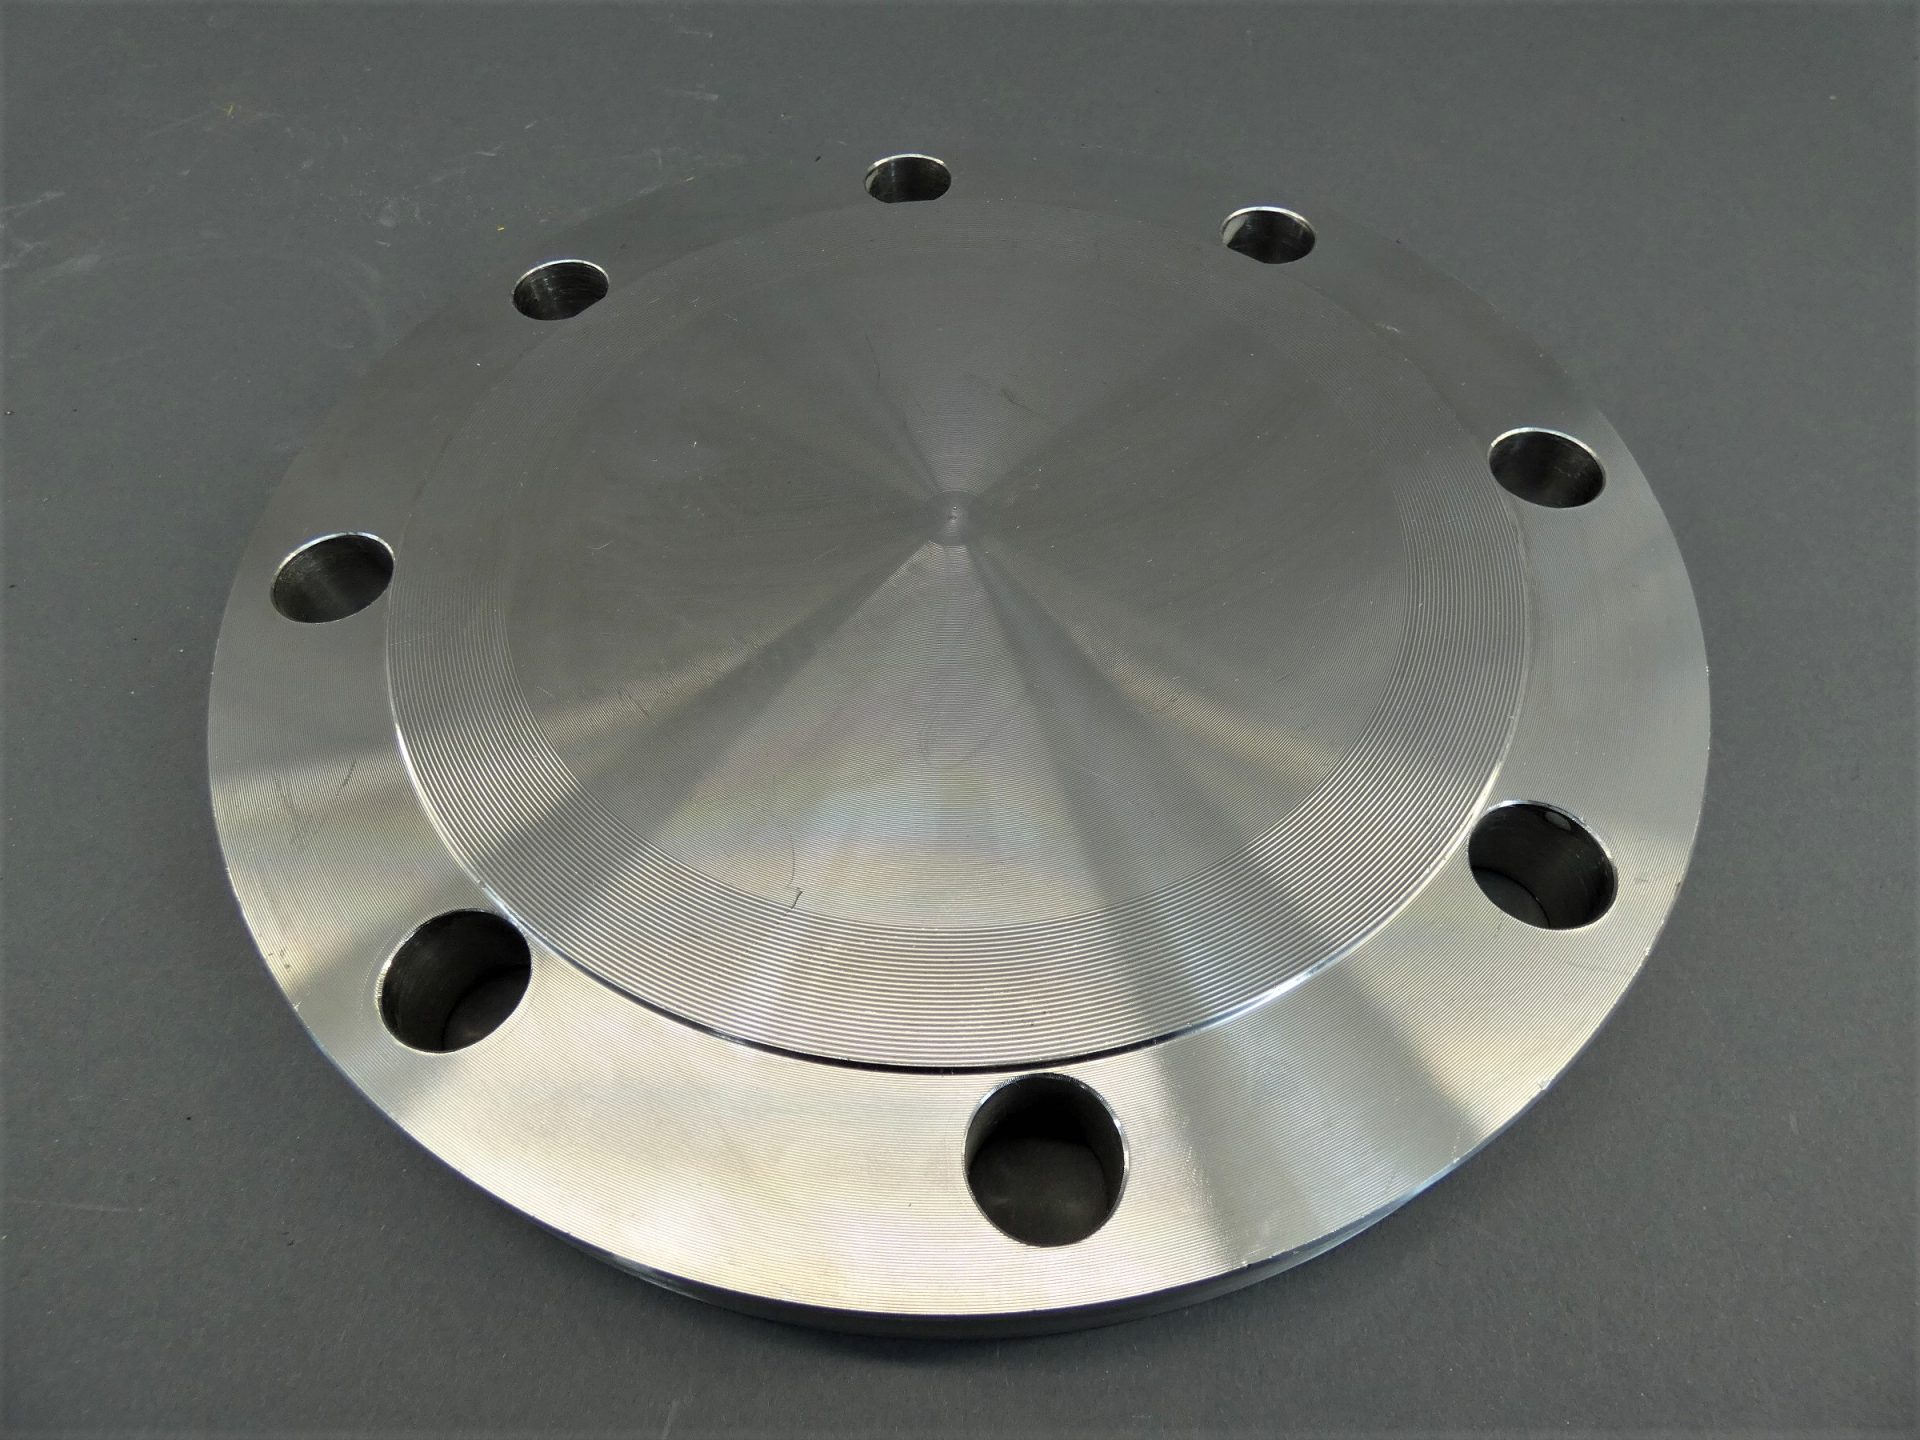 6″ Ansi Blind Flange B165 A182 Raised Face Rf Stainless Steel 150 316316l Ss Gpm Surplus 8288